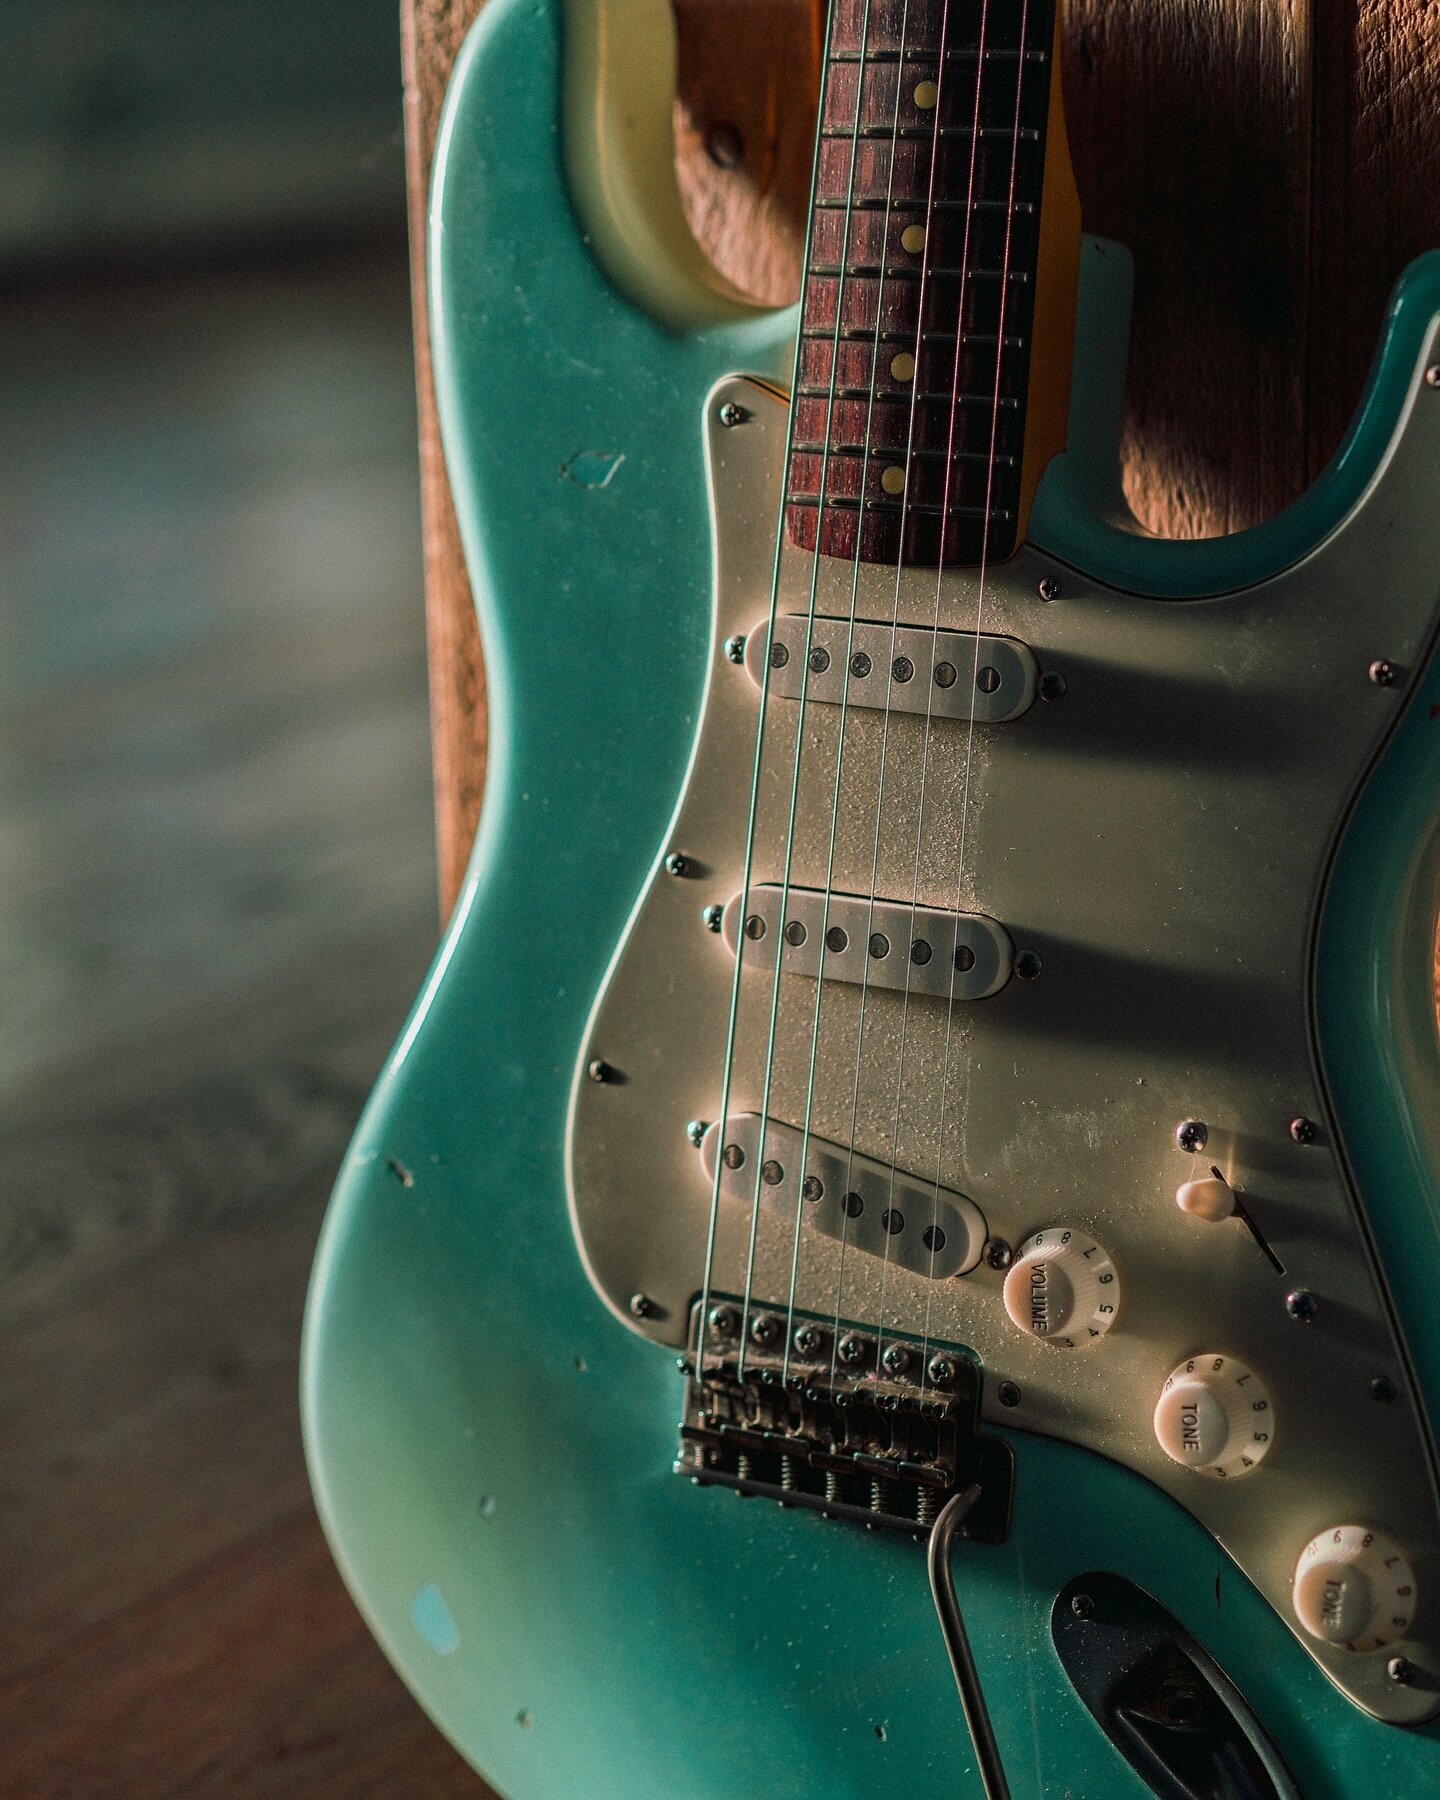 Diffuse, late afternoon light across the body of a guitar. What could be better? 
.
#straturday #stratocaster #fenderstratocaster #direstraits #strat #guitarphotography